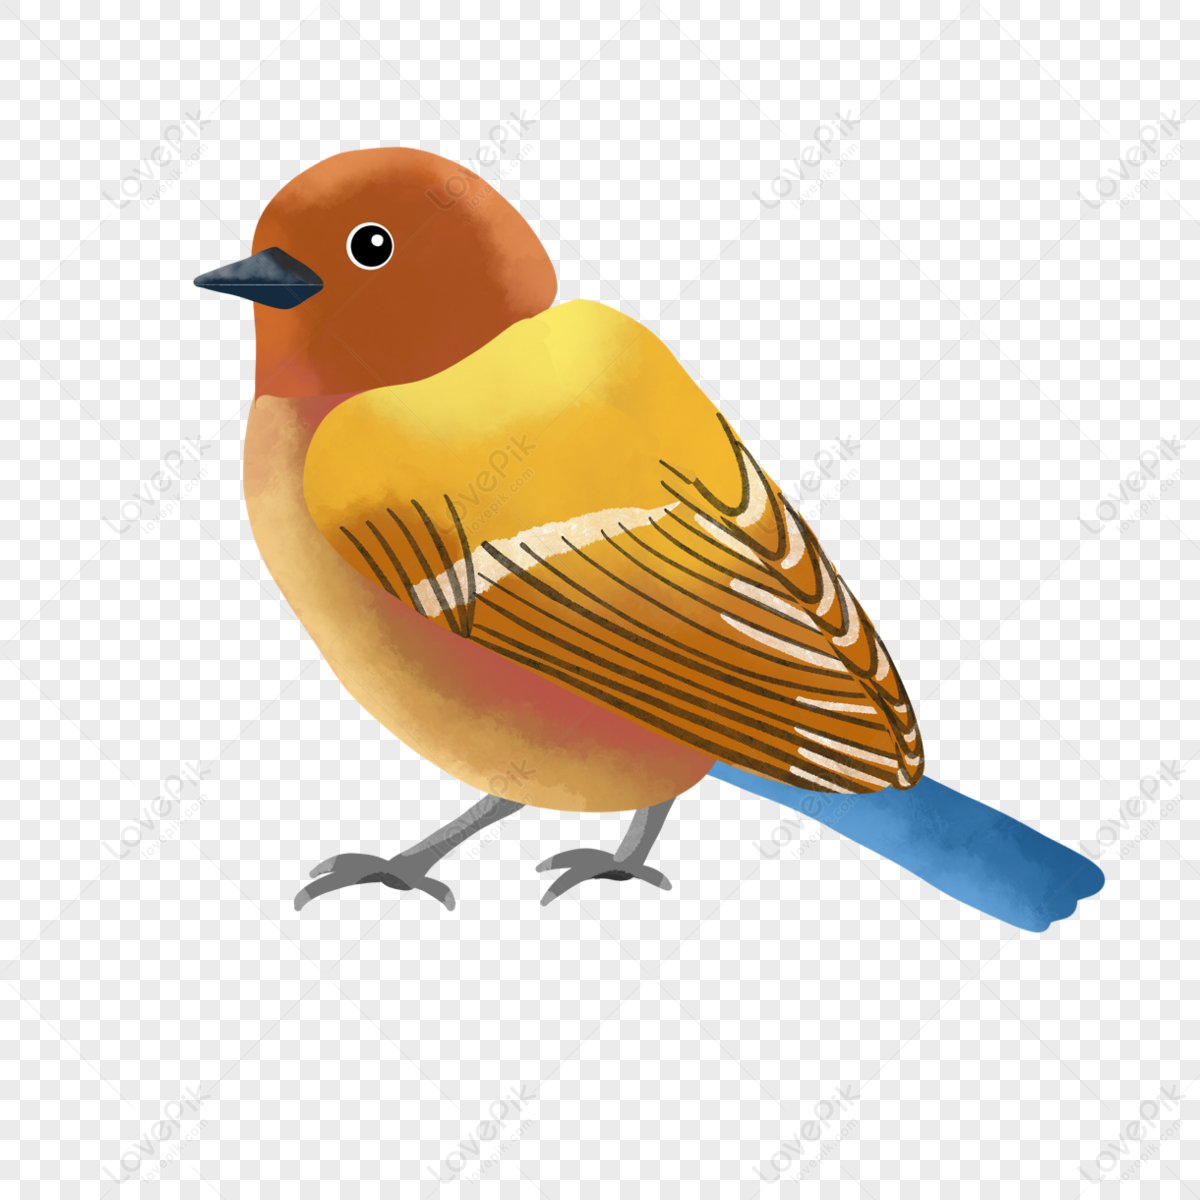 Colored watercolor bird animals,tail,birds,colorful birds png transparent image